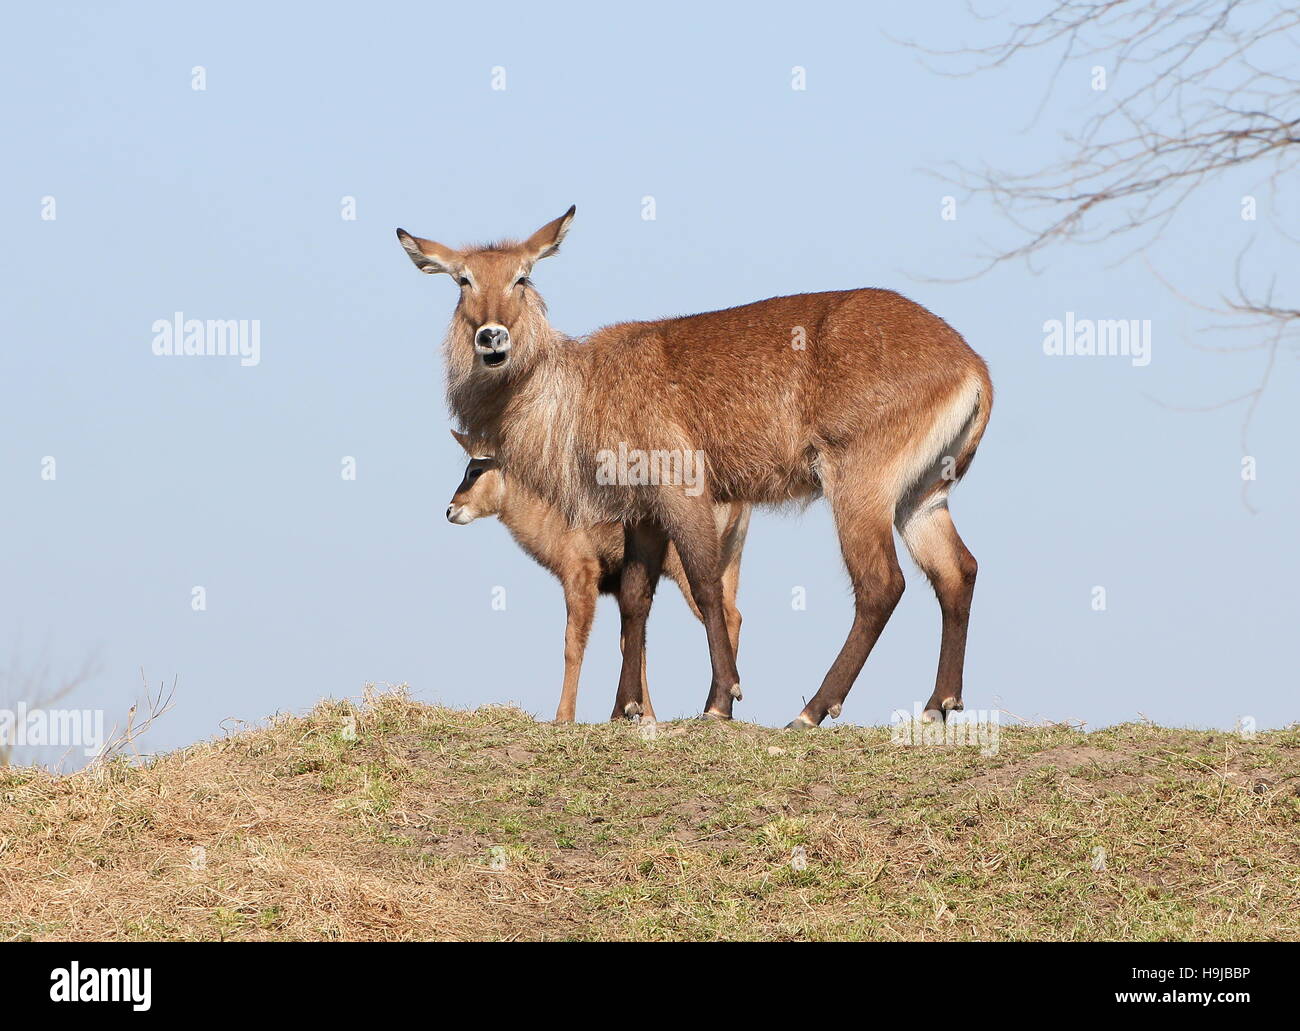 Female Defassa waterbuck (Kobus ellipsiprymnus defassa) with a baby calf. Standing on top of a hill Stock Photo